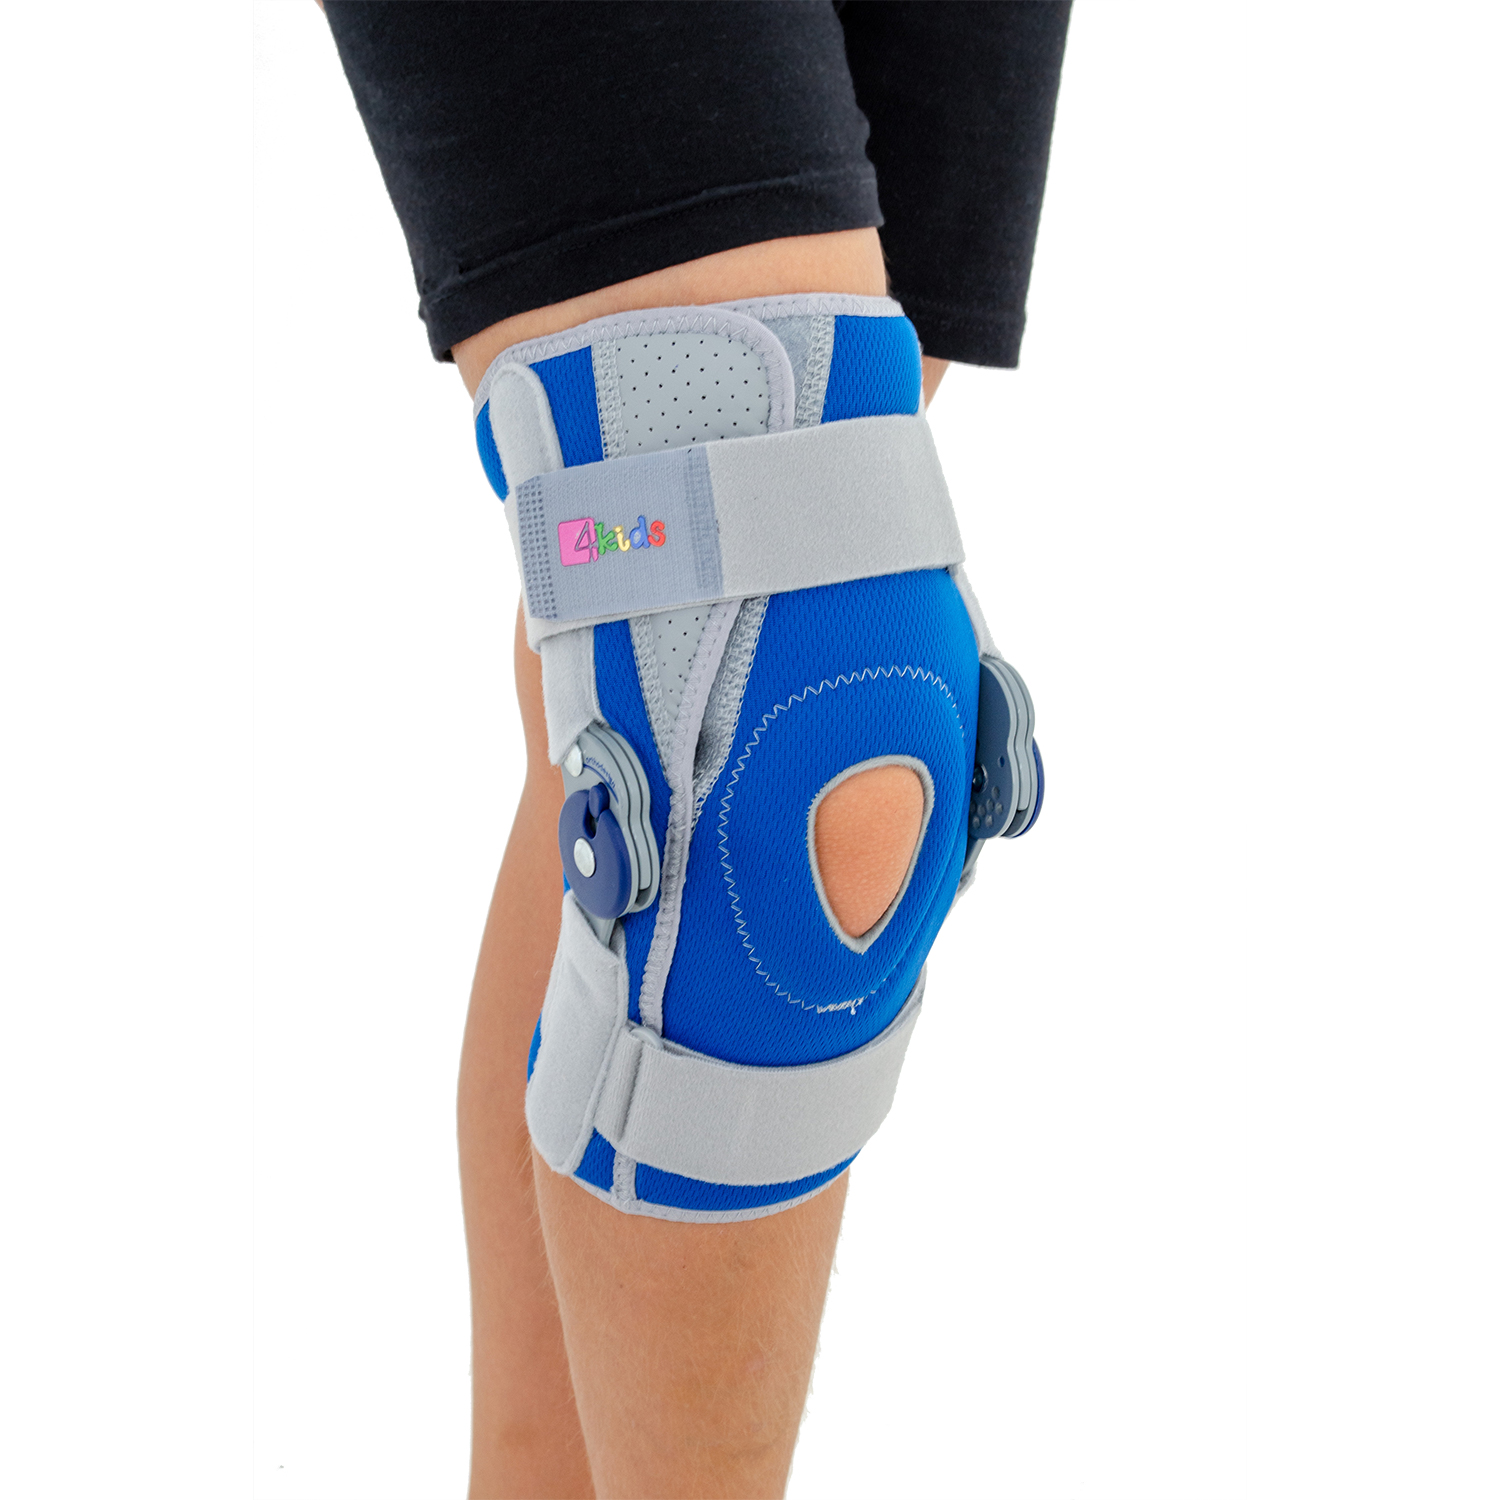 When Would Custom Bracing Be Useful for an ACL or OA of Knee